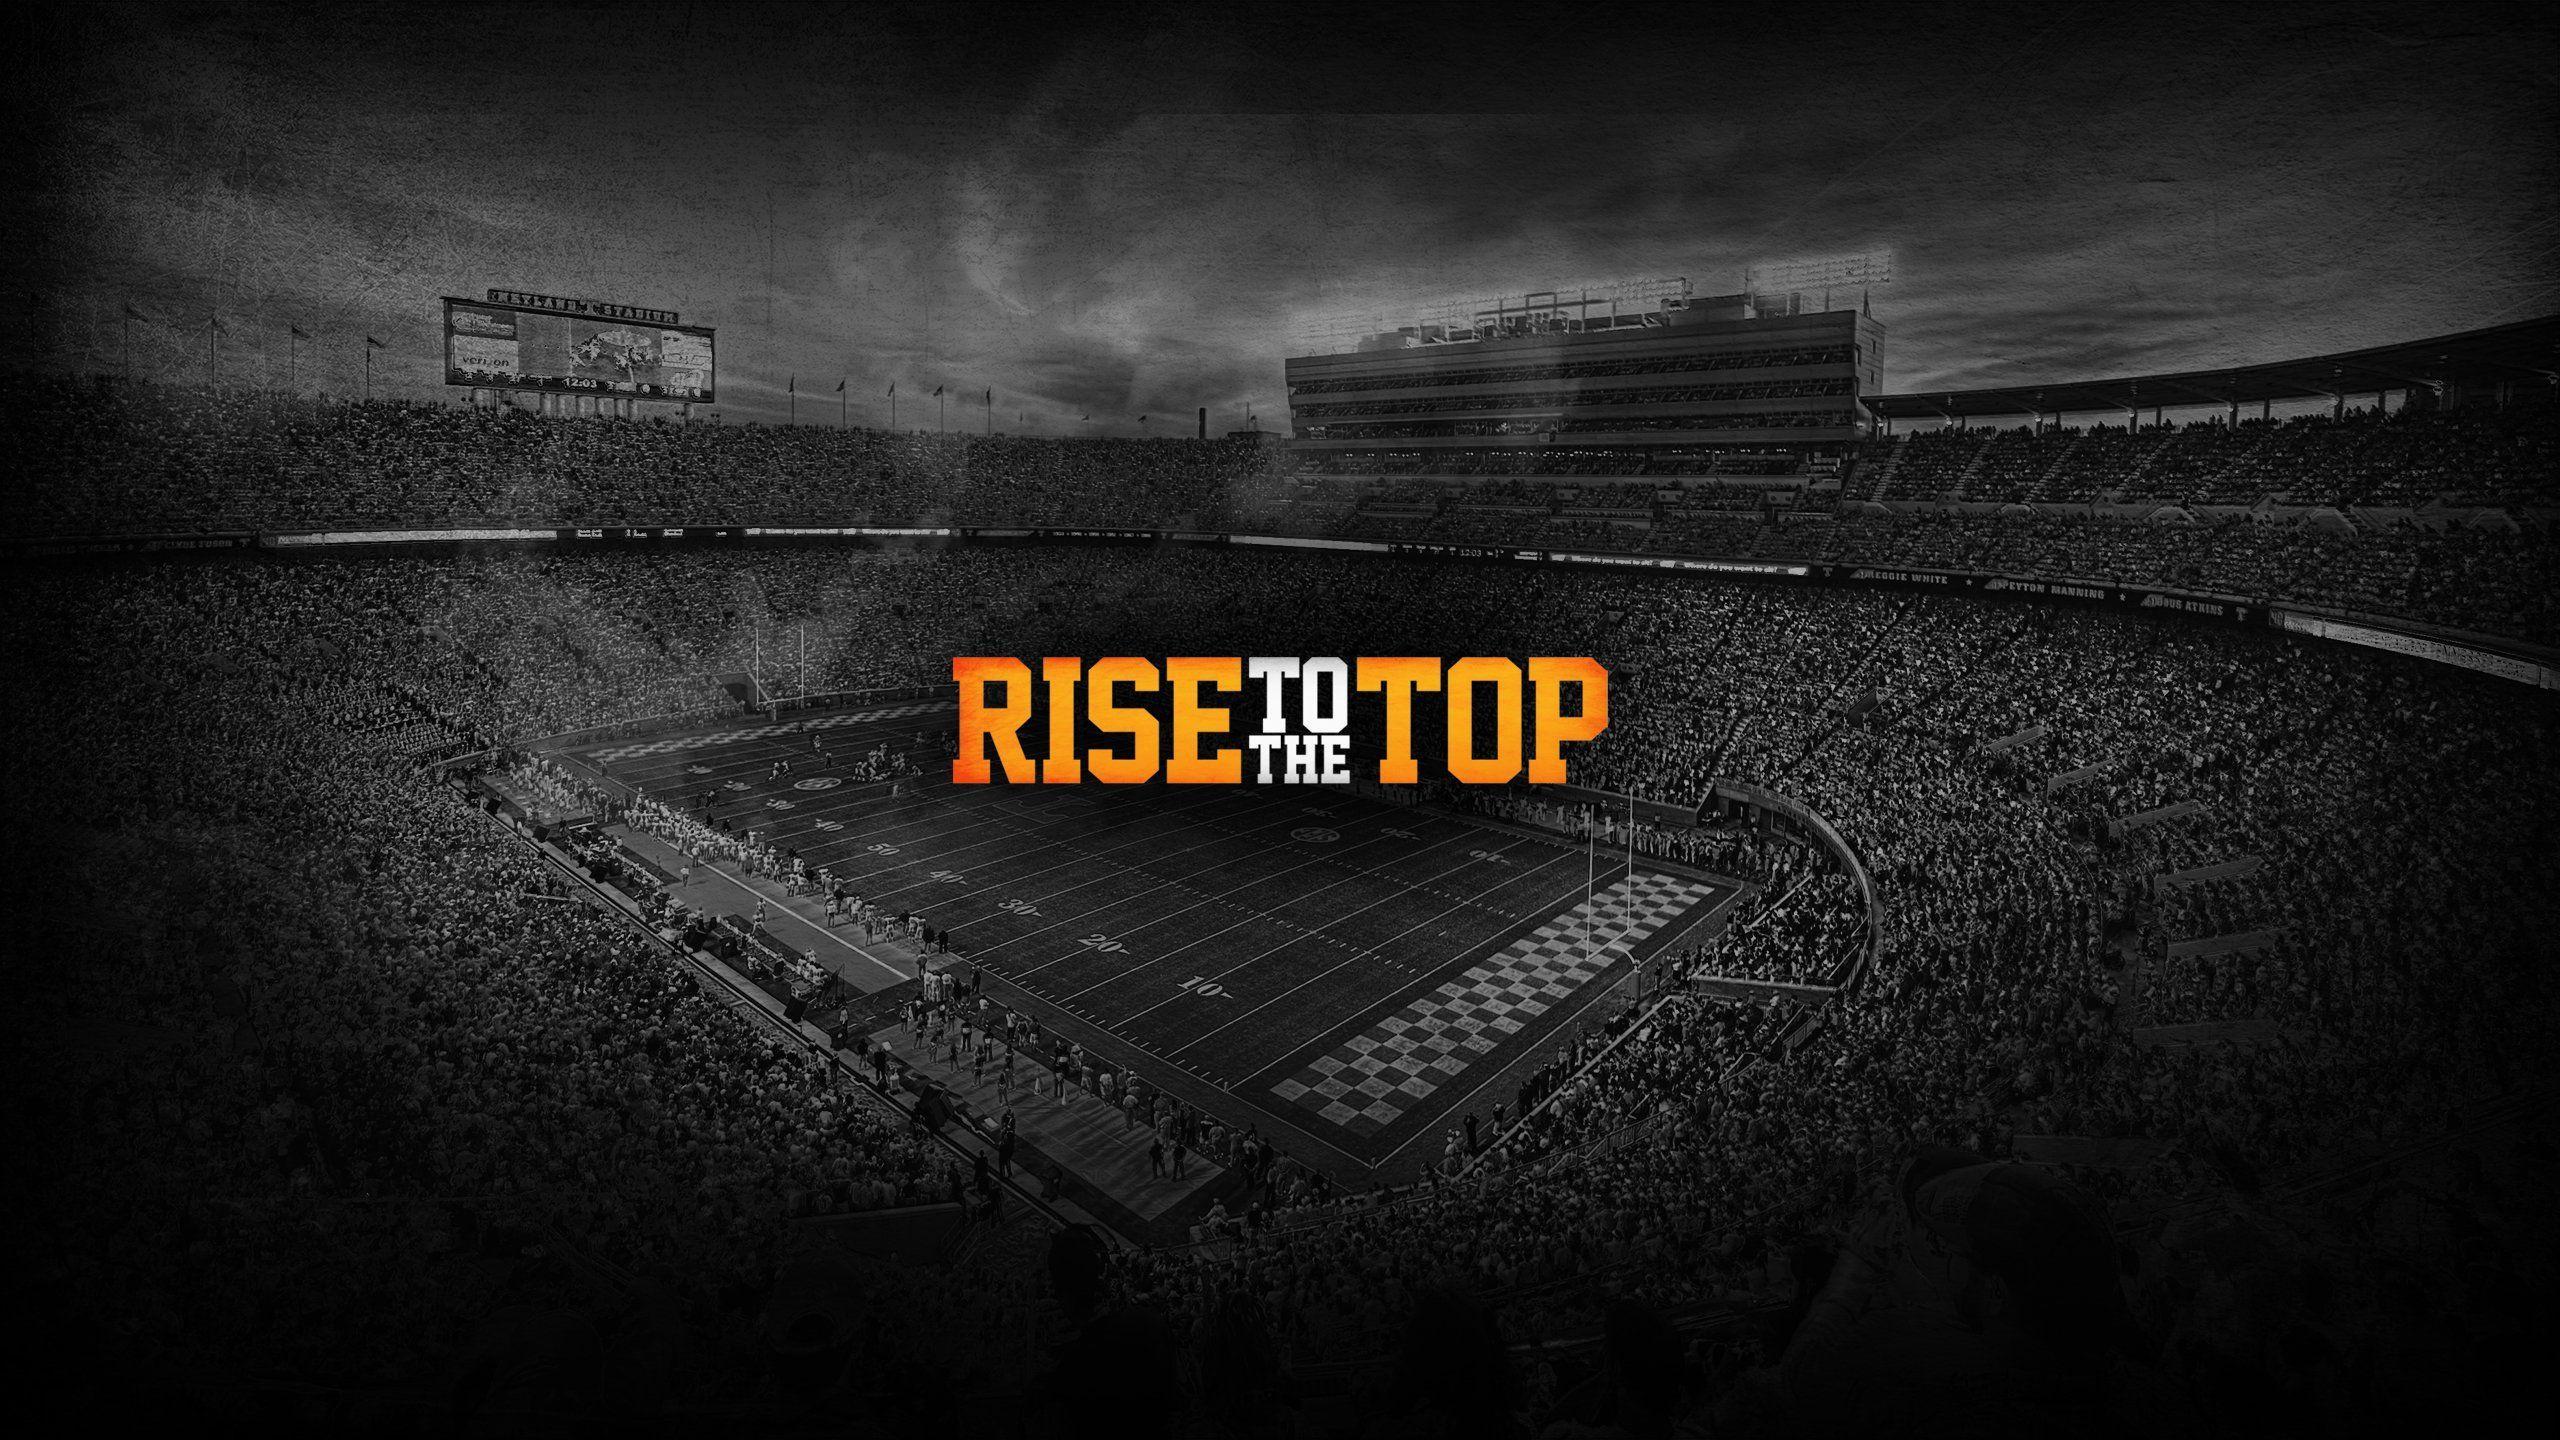 University of Tennessee Wallpaper Free University of Tennessee Background